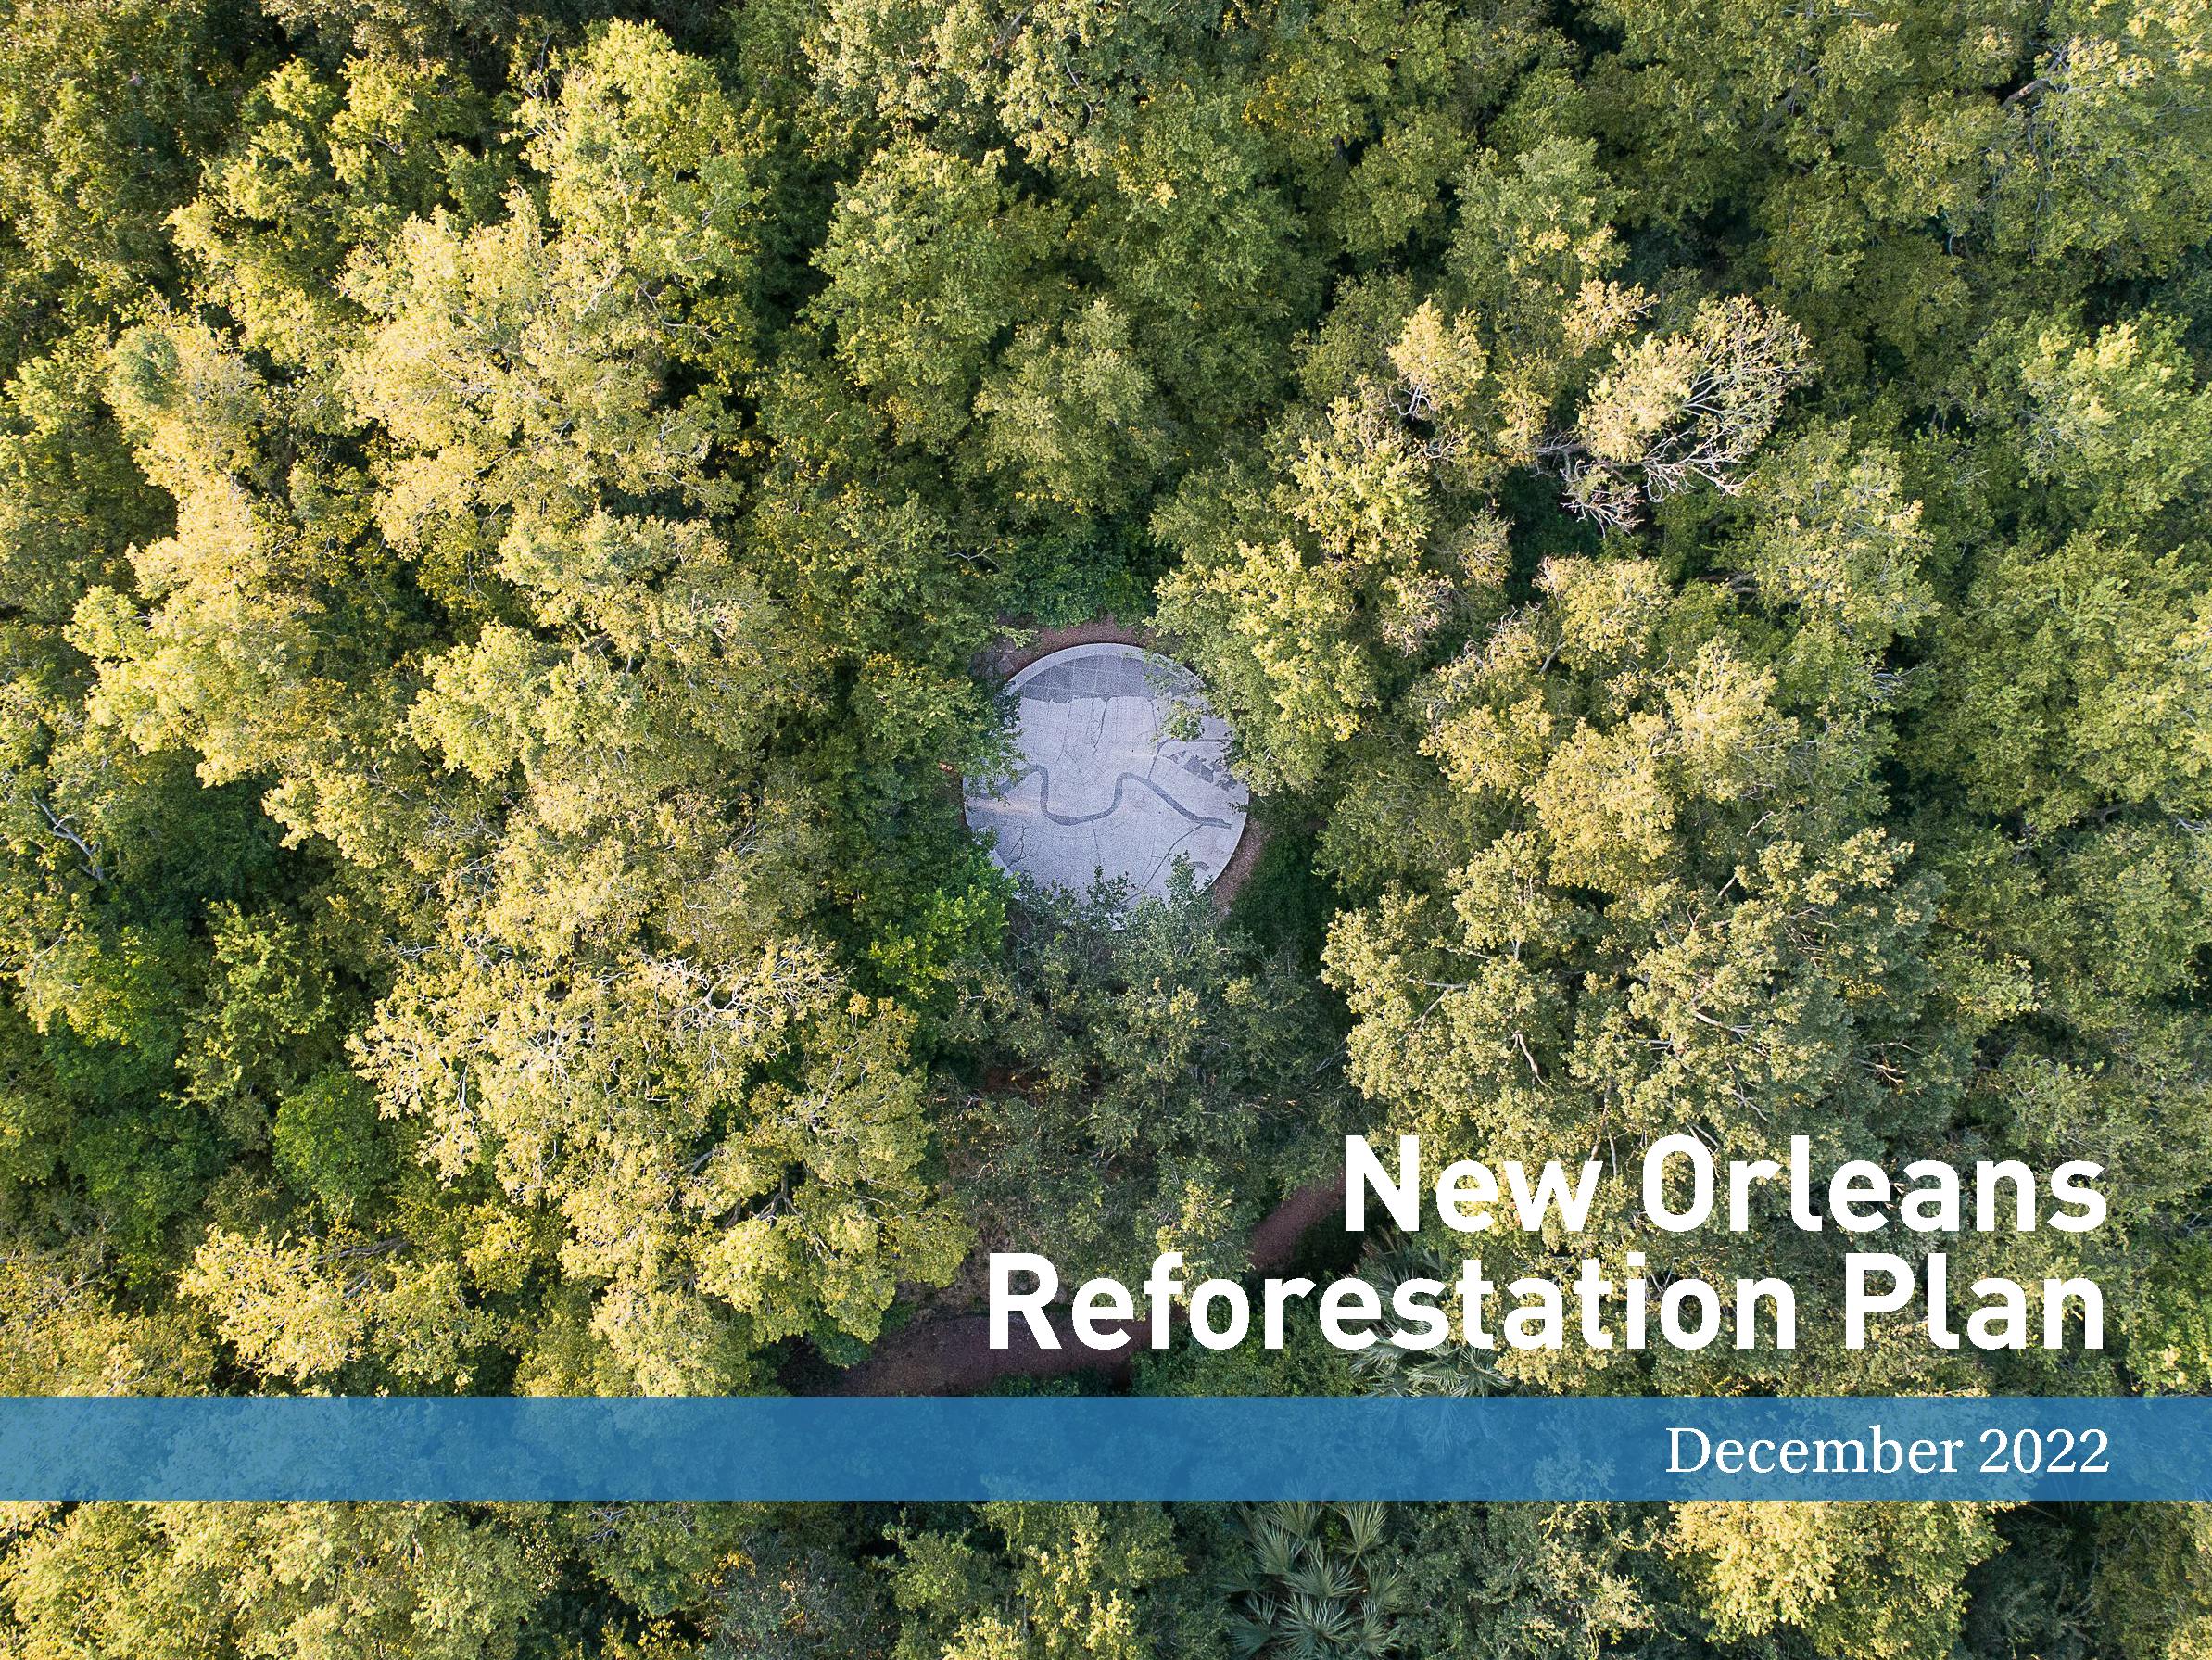 cover of new orleans reforestation plan report. Aerial photo of tree tops with grey stone deck in center